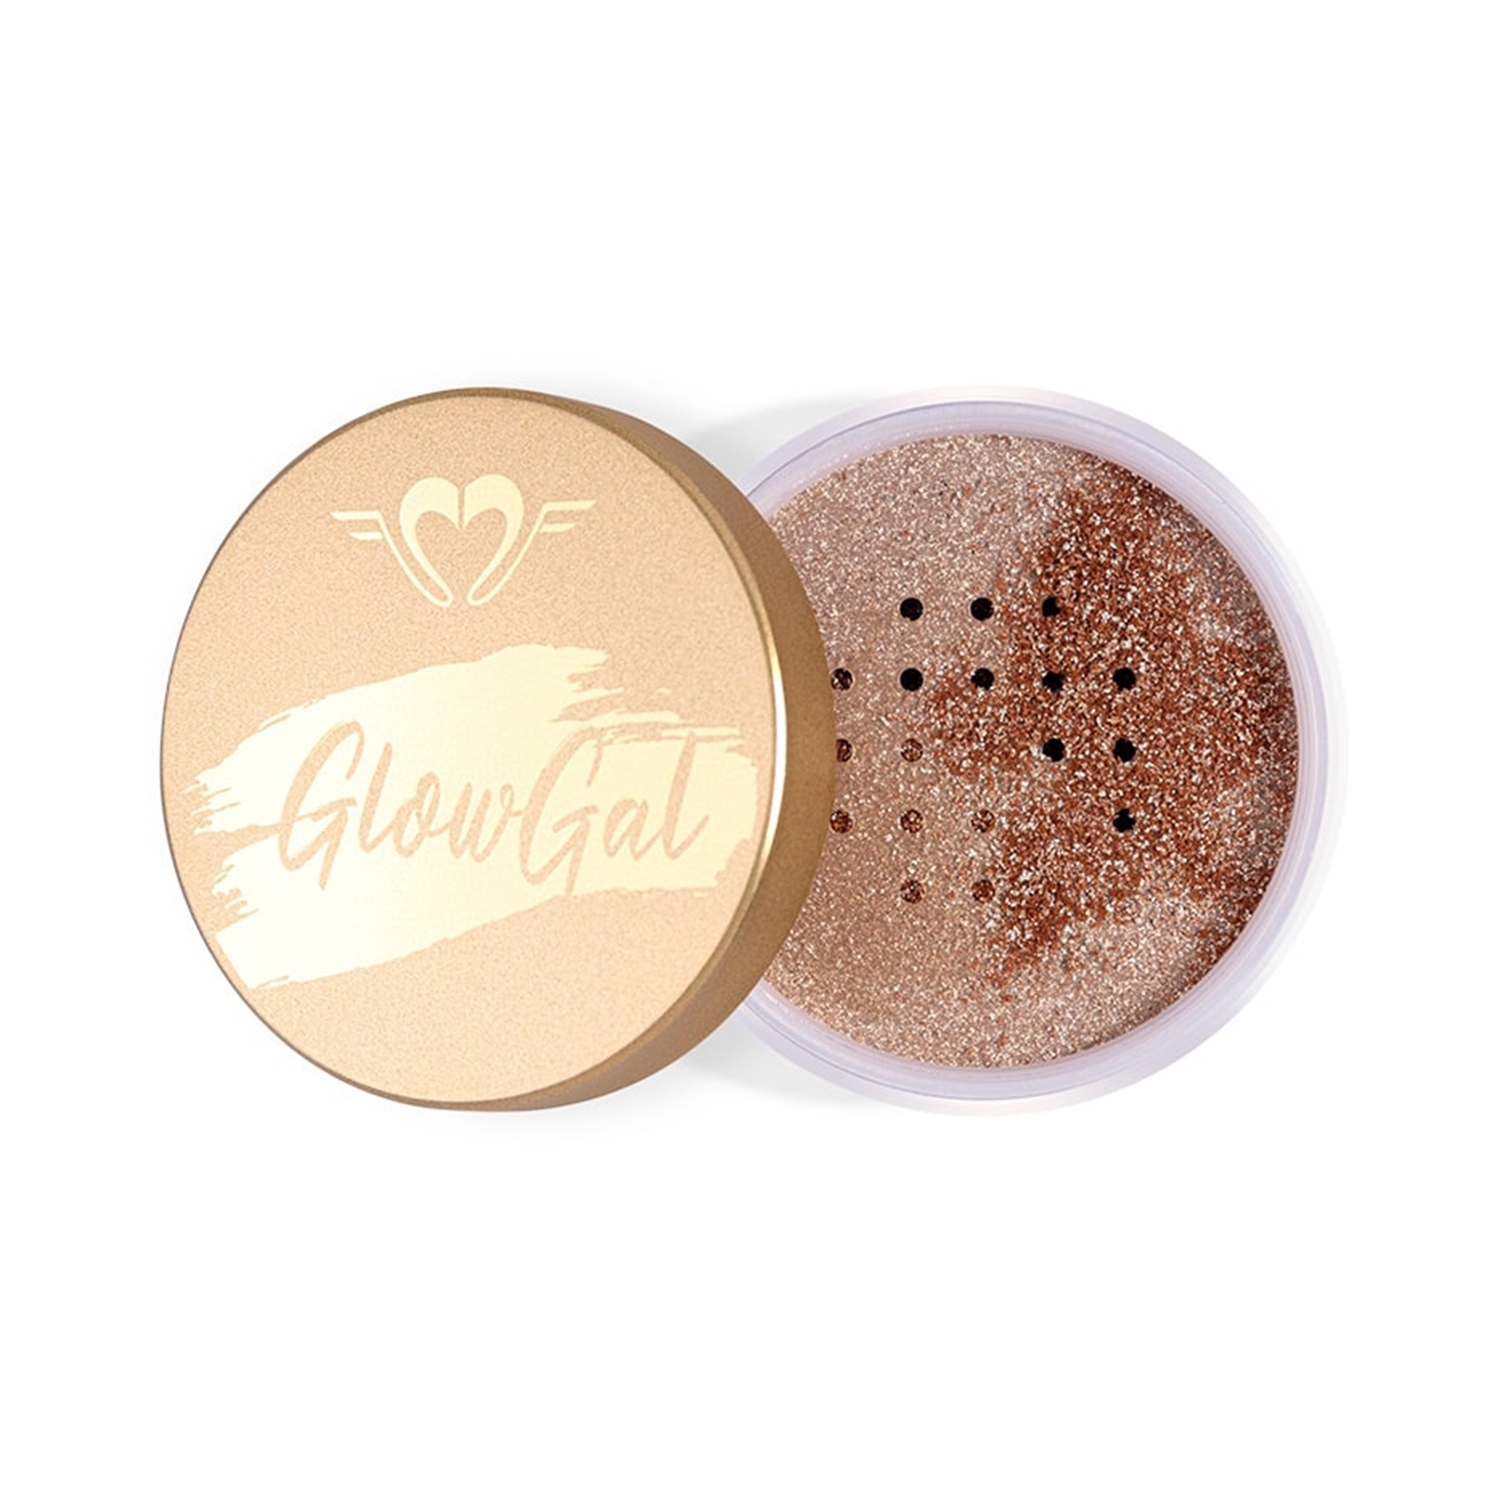 Daily Life Forever52 | Daily Life Forever52 Glow Gal Loose Highlighter GGH004 - Golden Brown (15g)